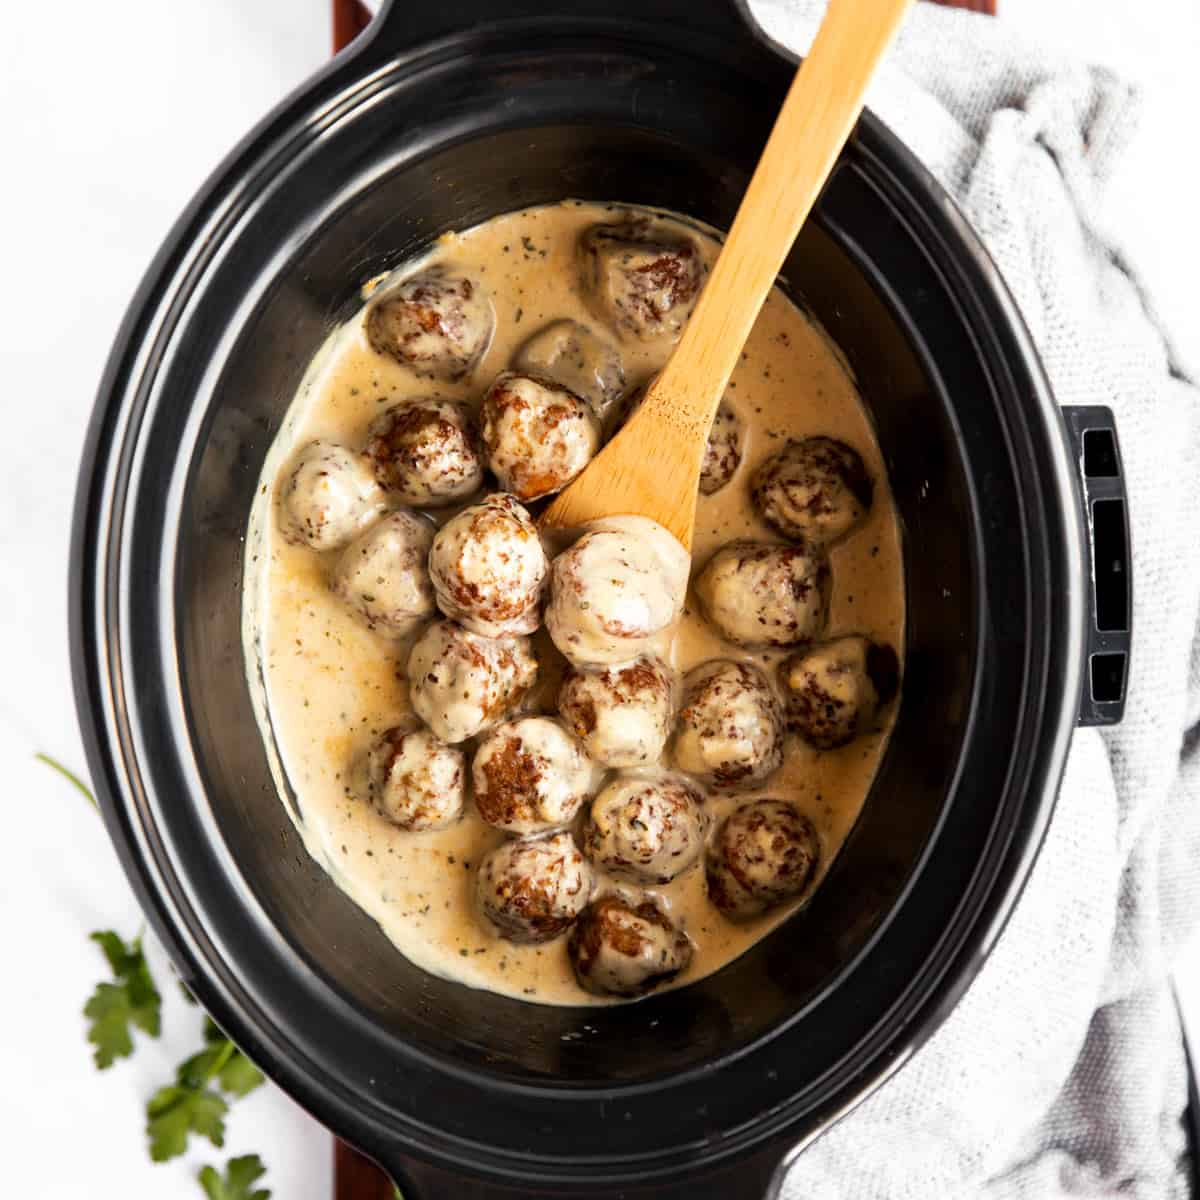 top down view on crockpot filled with Swedish meatballs